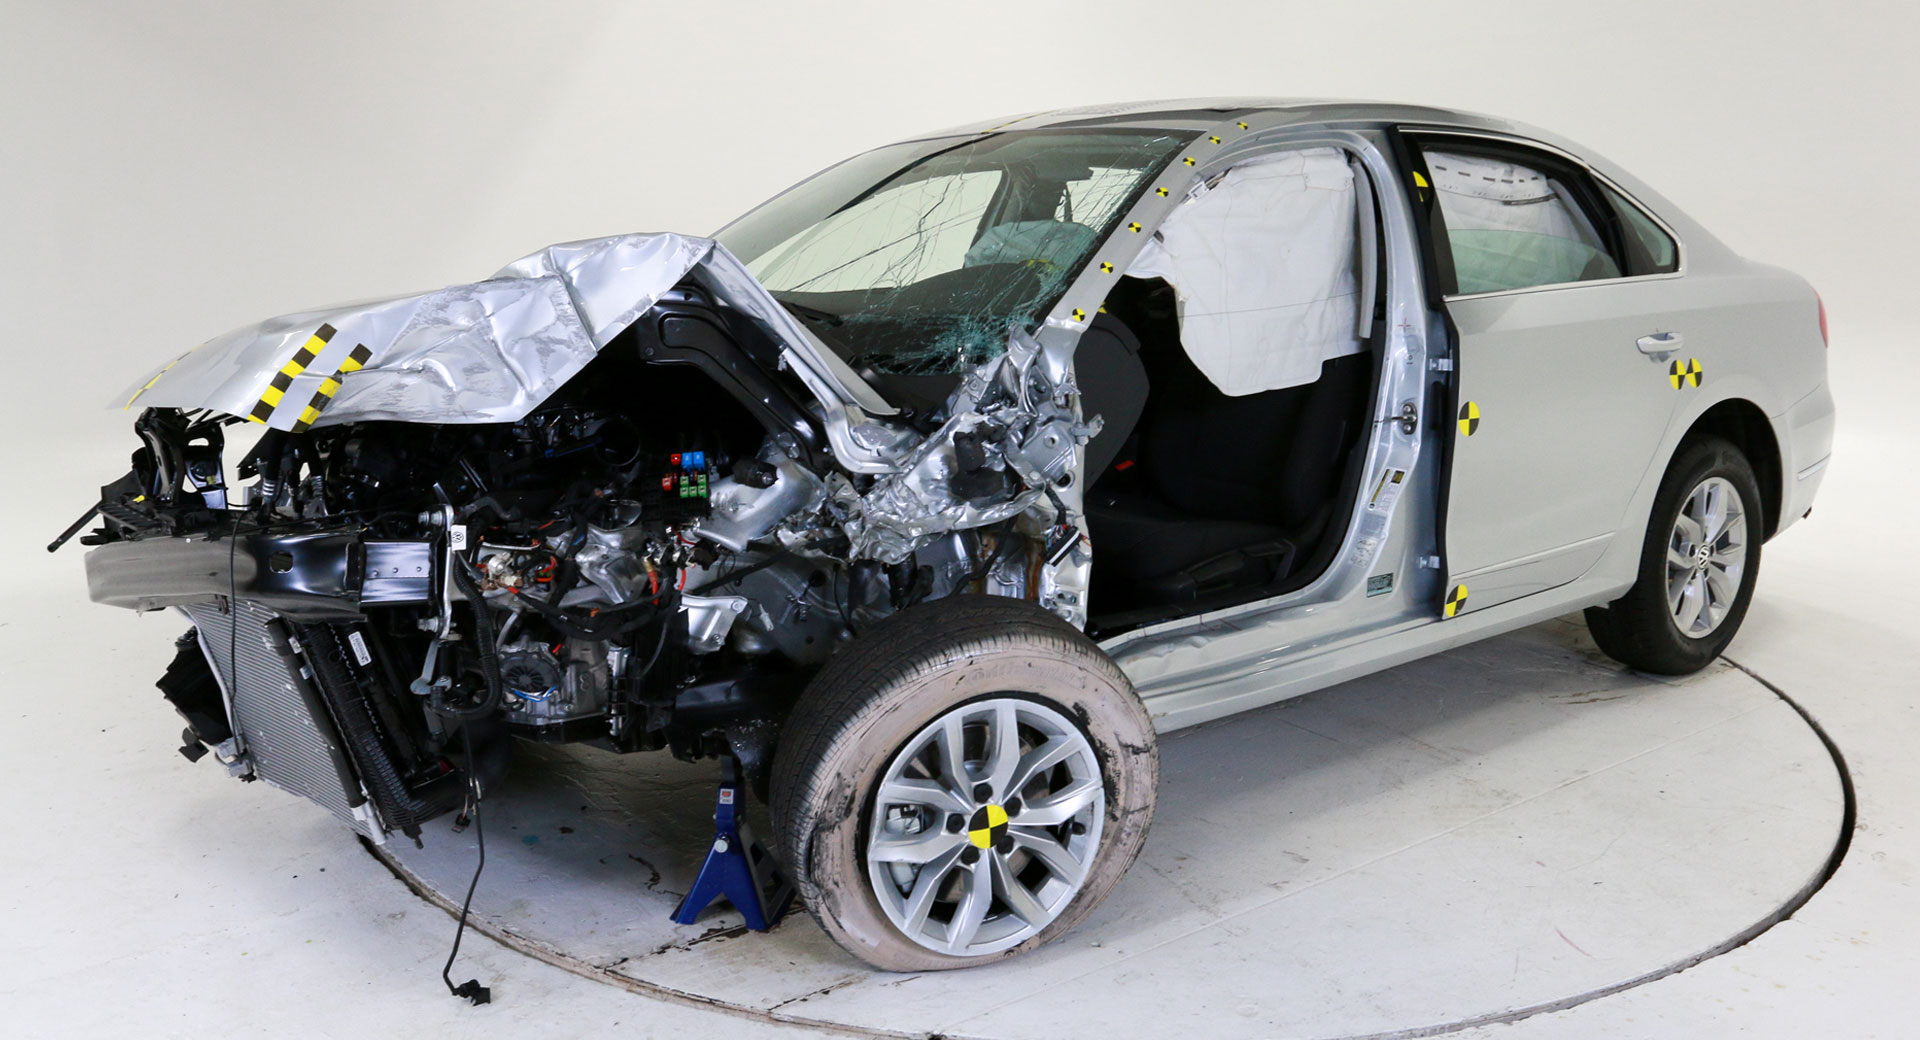 Driver-assist systems cut rear-end crashes by 49%